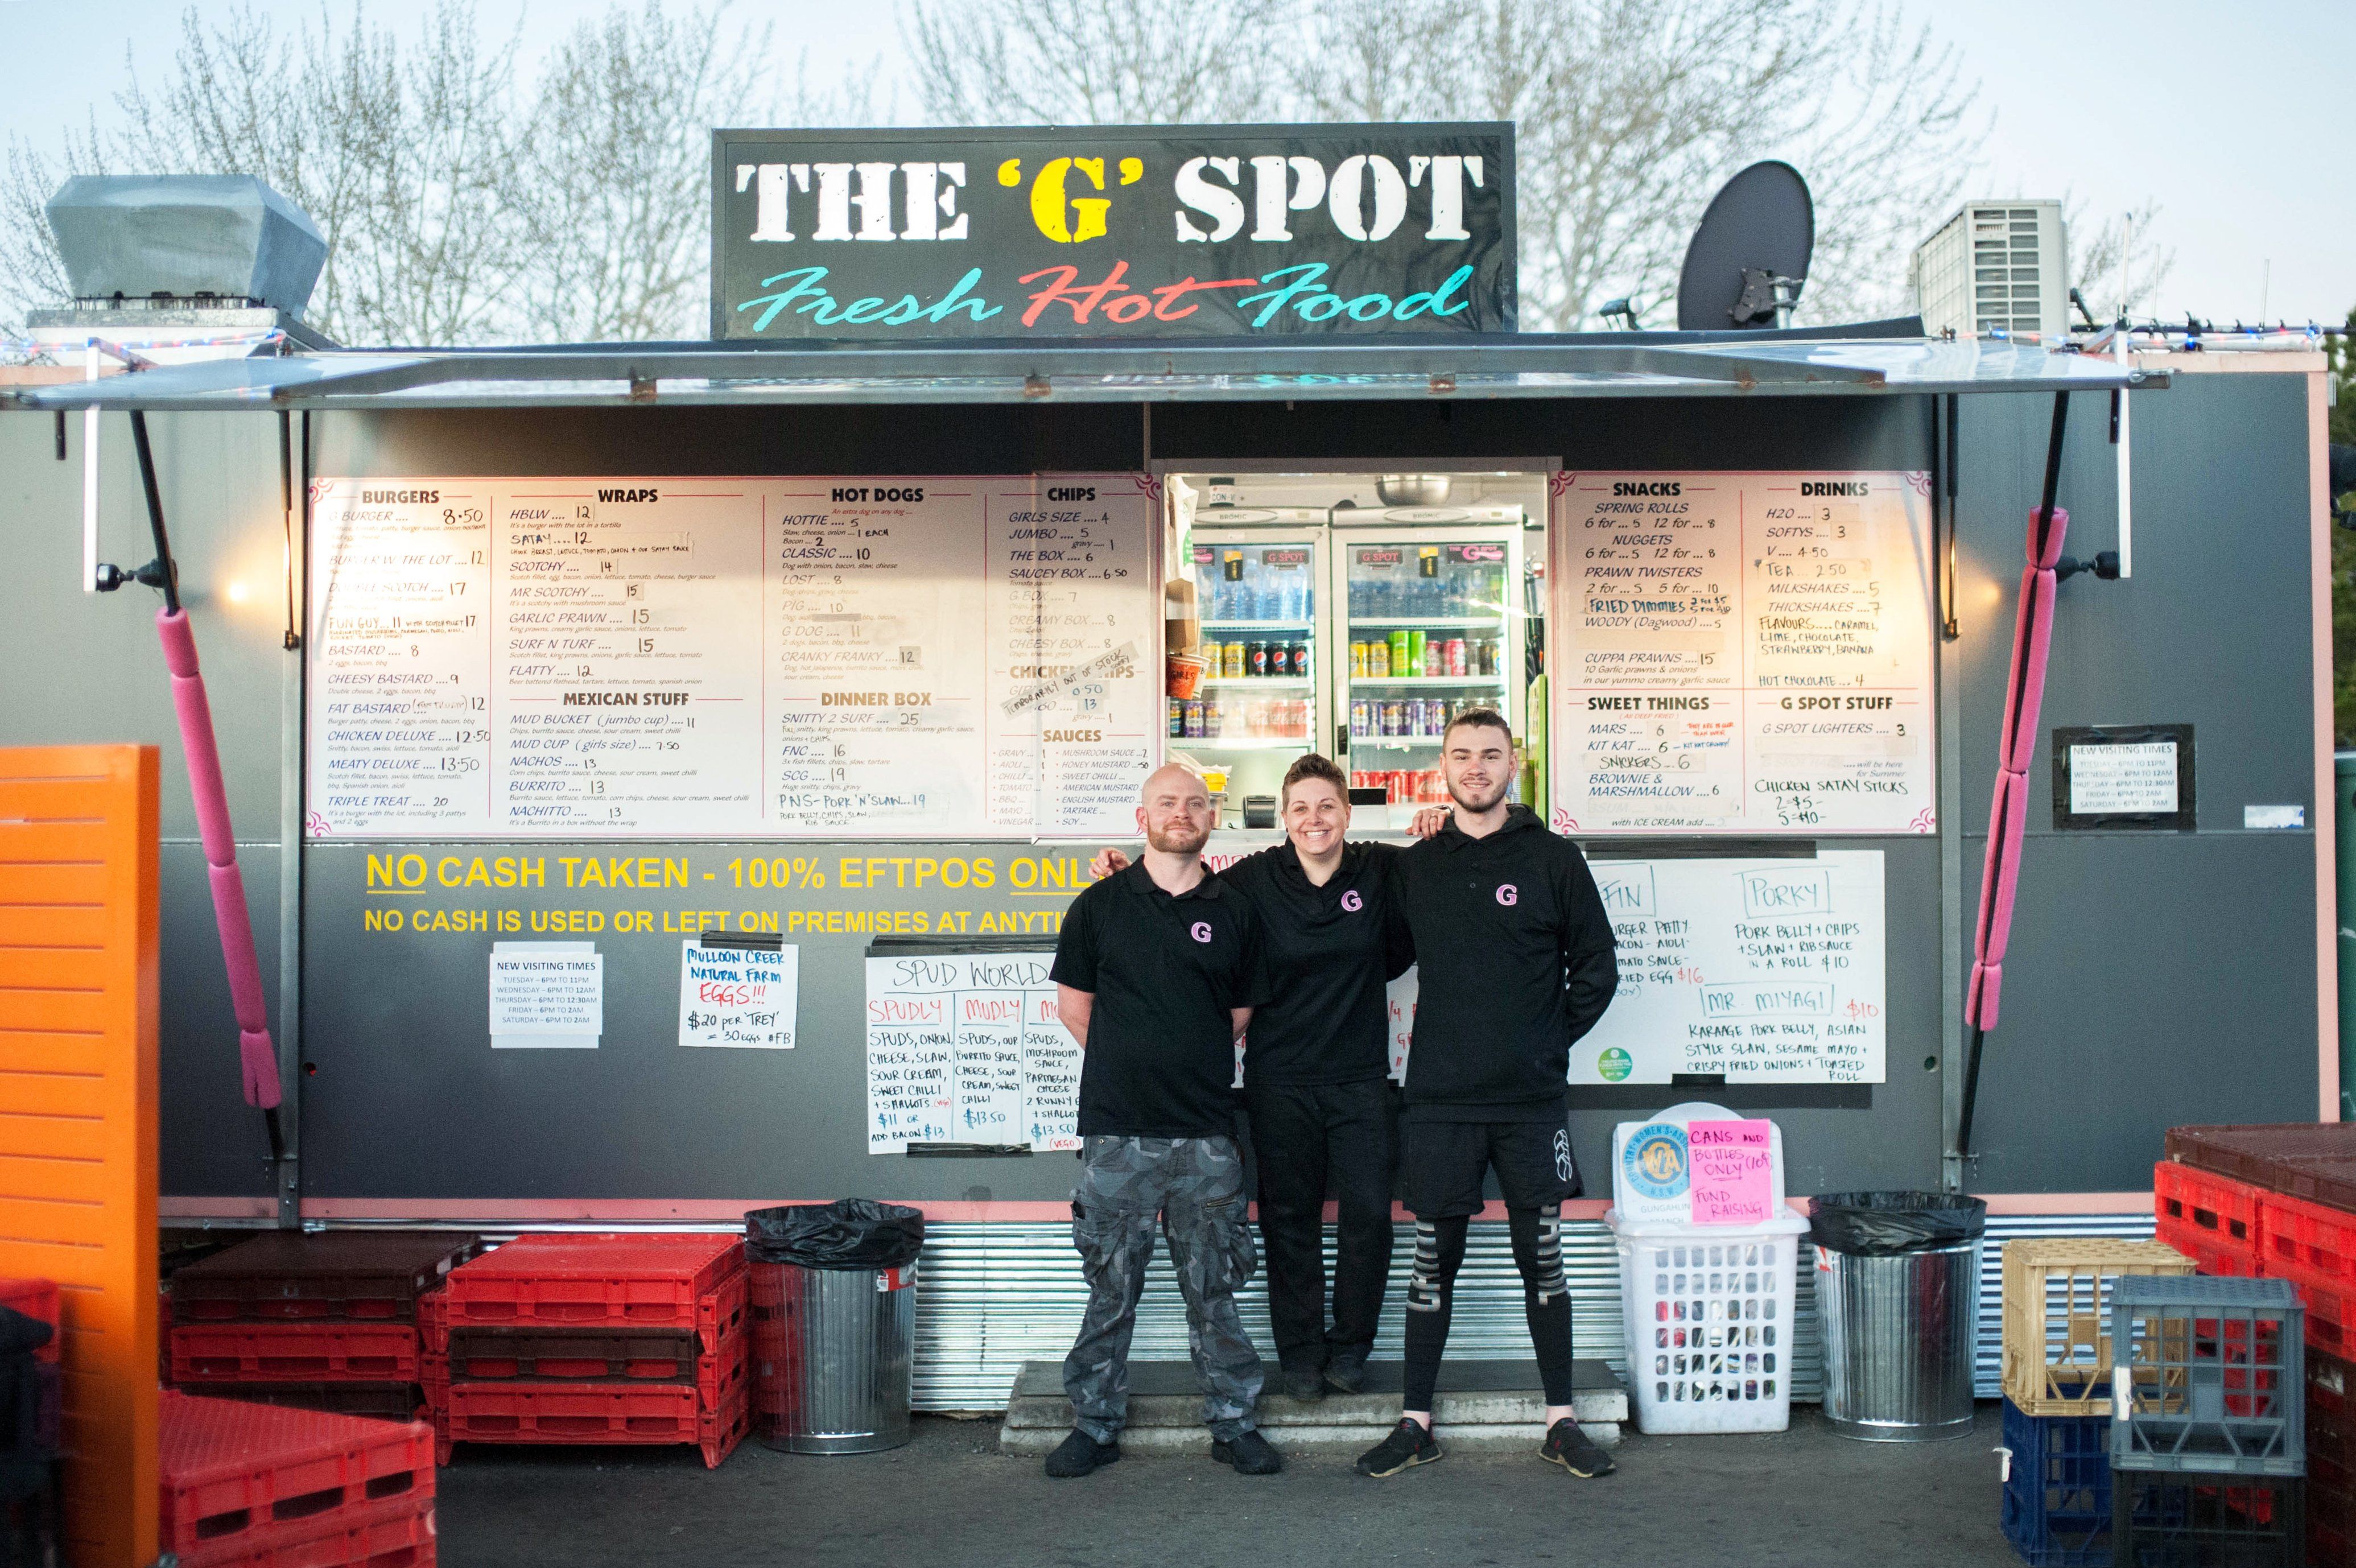 The food truck hitting the spot for nearly 20 years